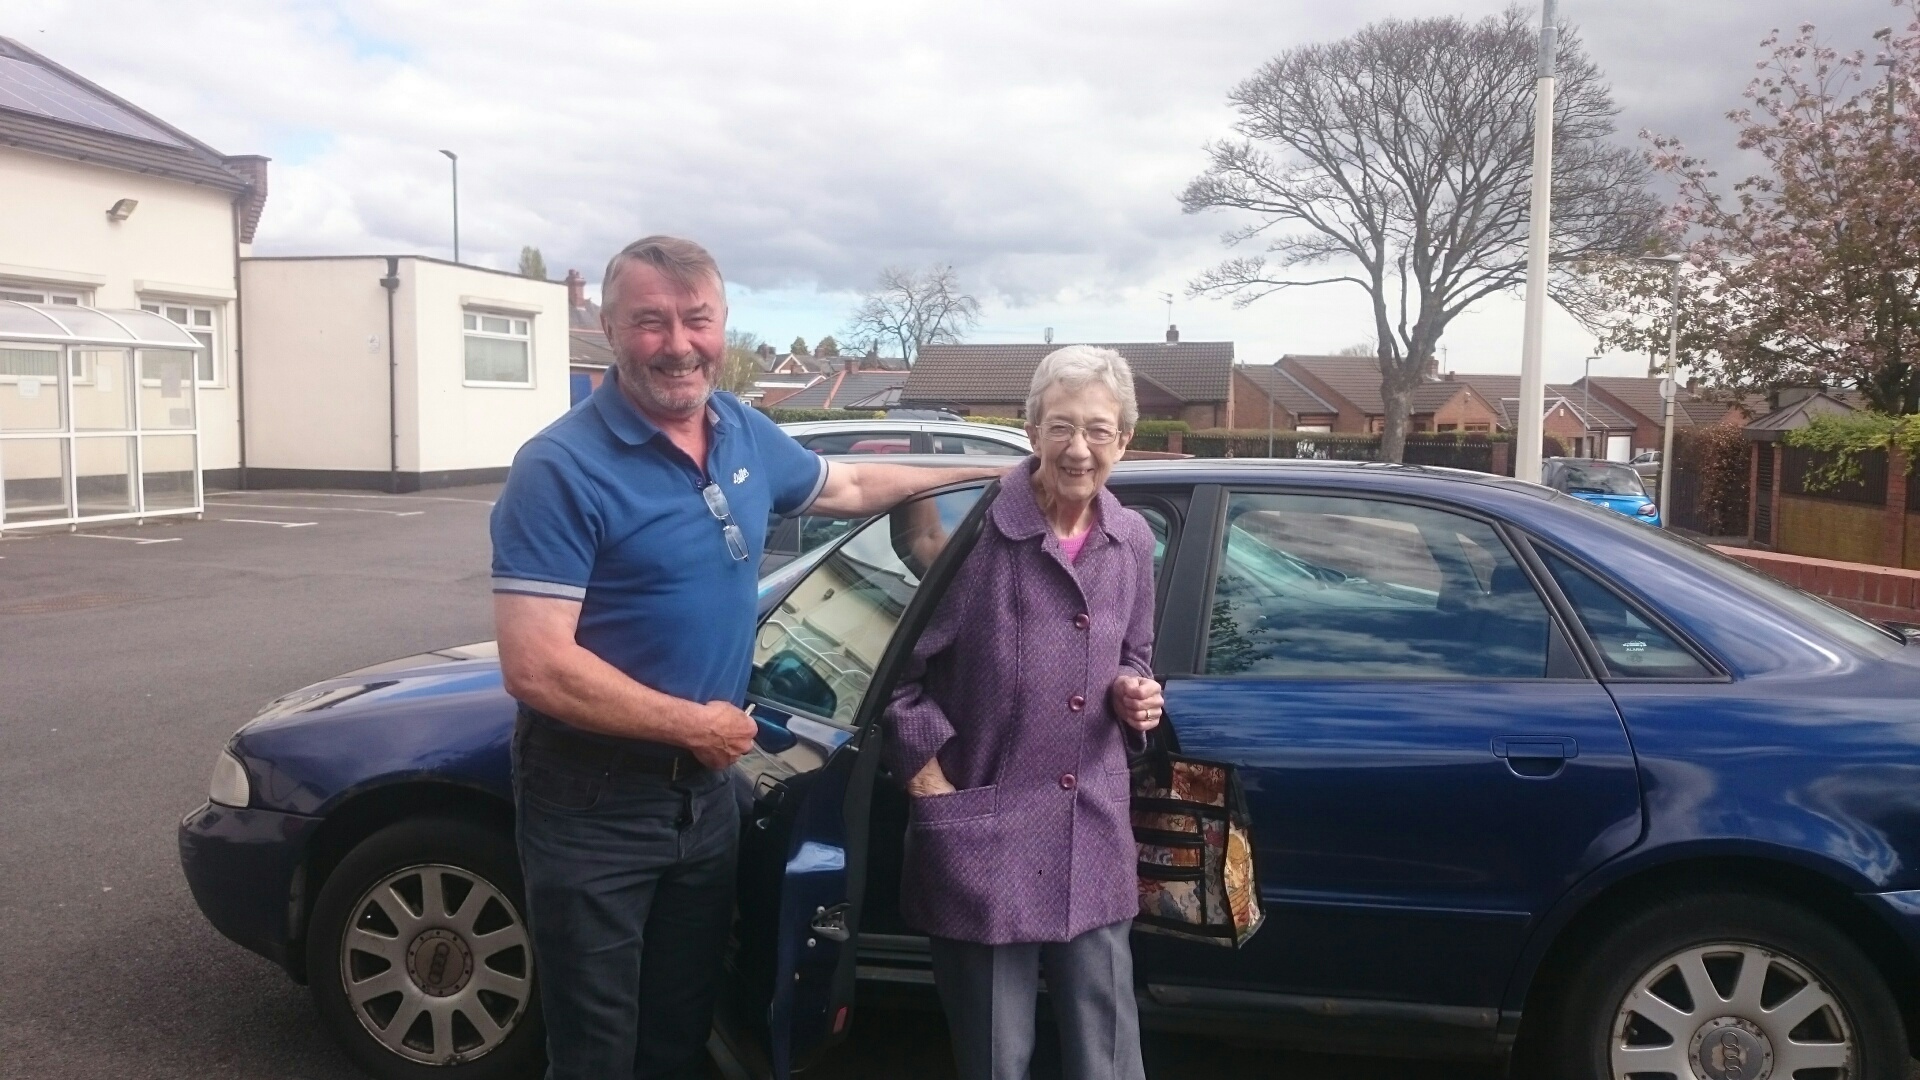 John, volunteer driver with one of his passengers, Gwen next to a car